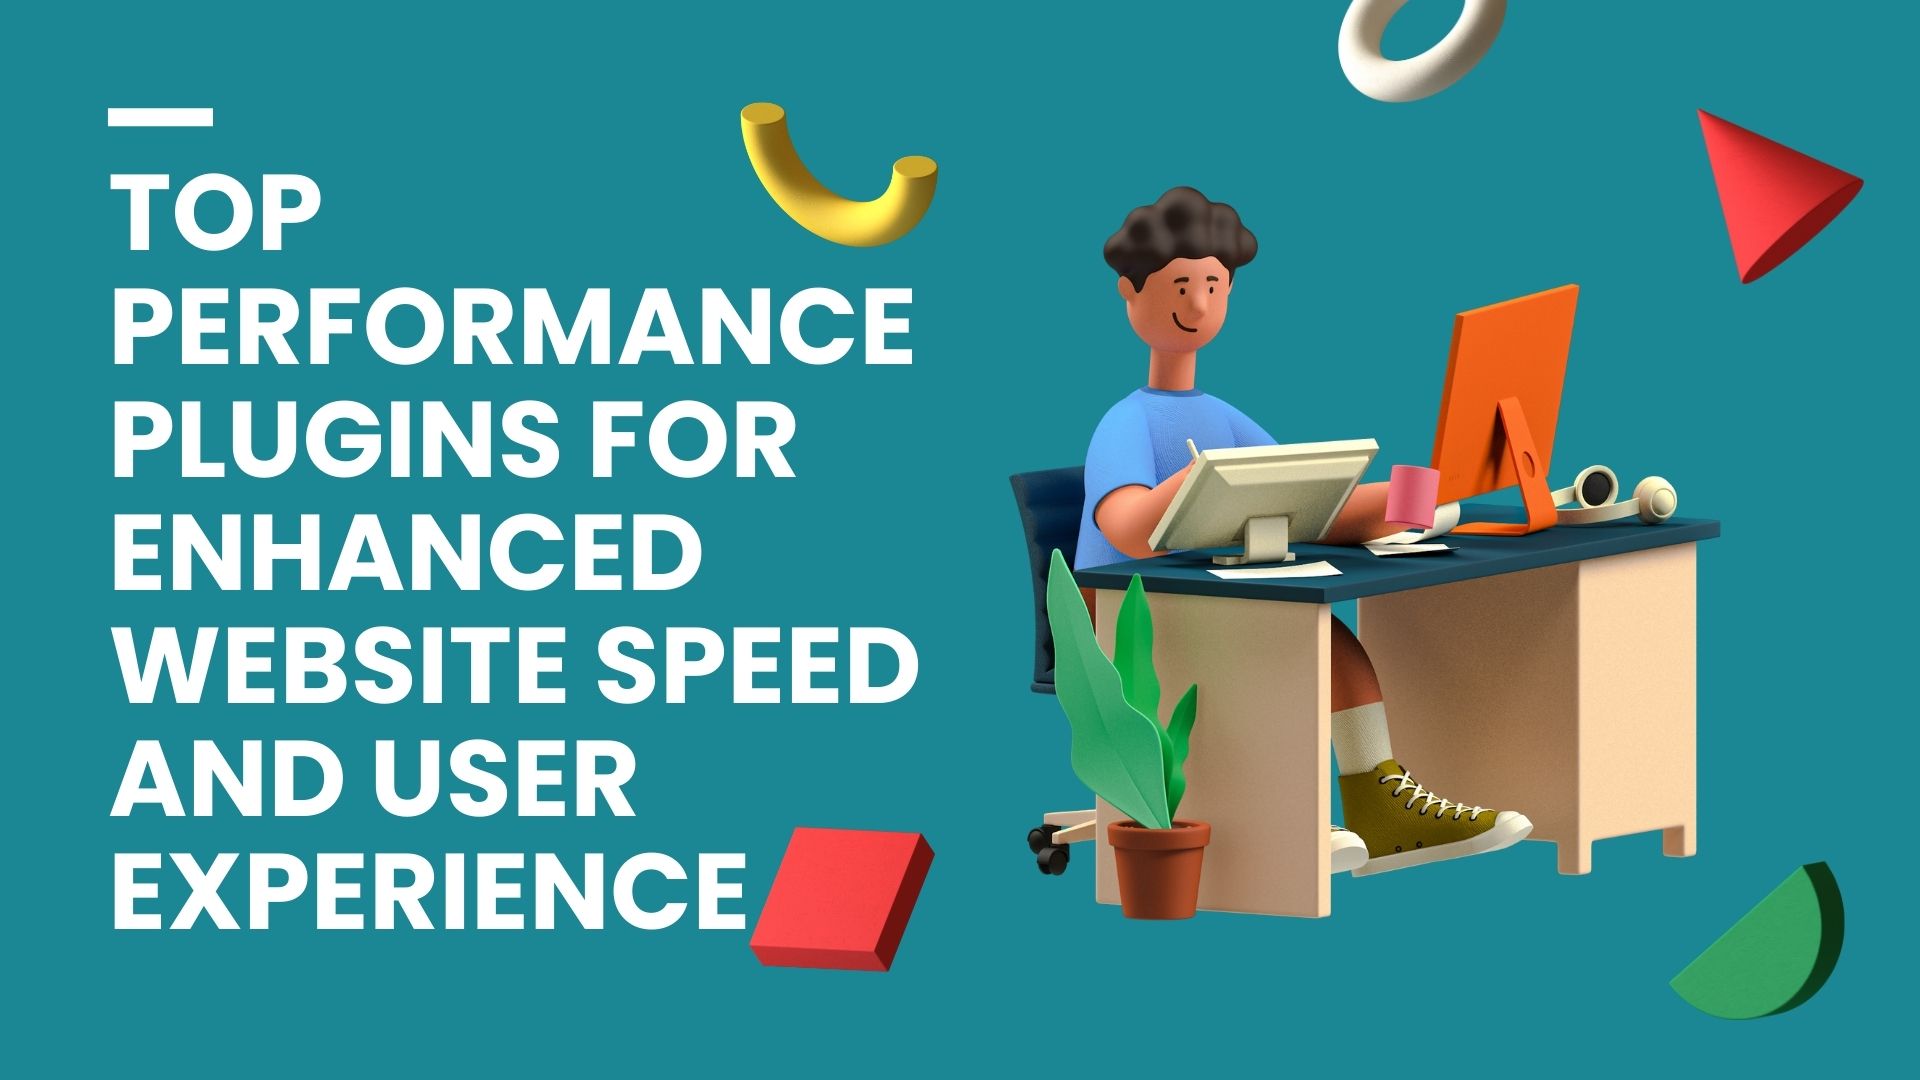 Top Performance Plugins for Enhanced Website Speed and User Experience